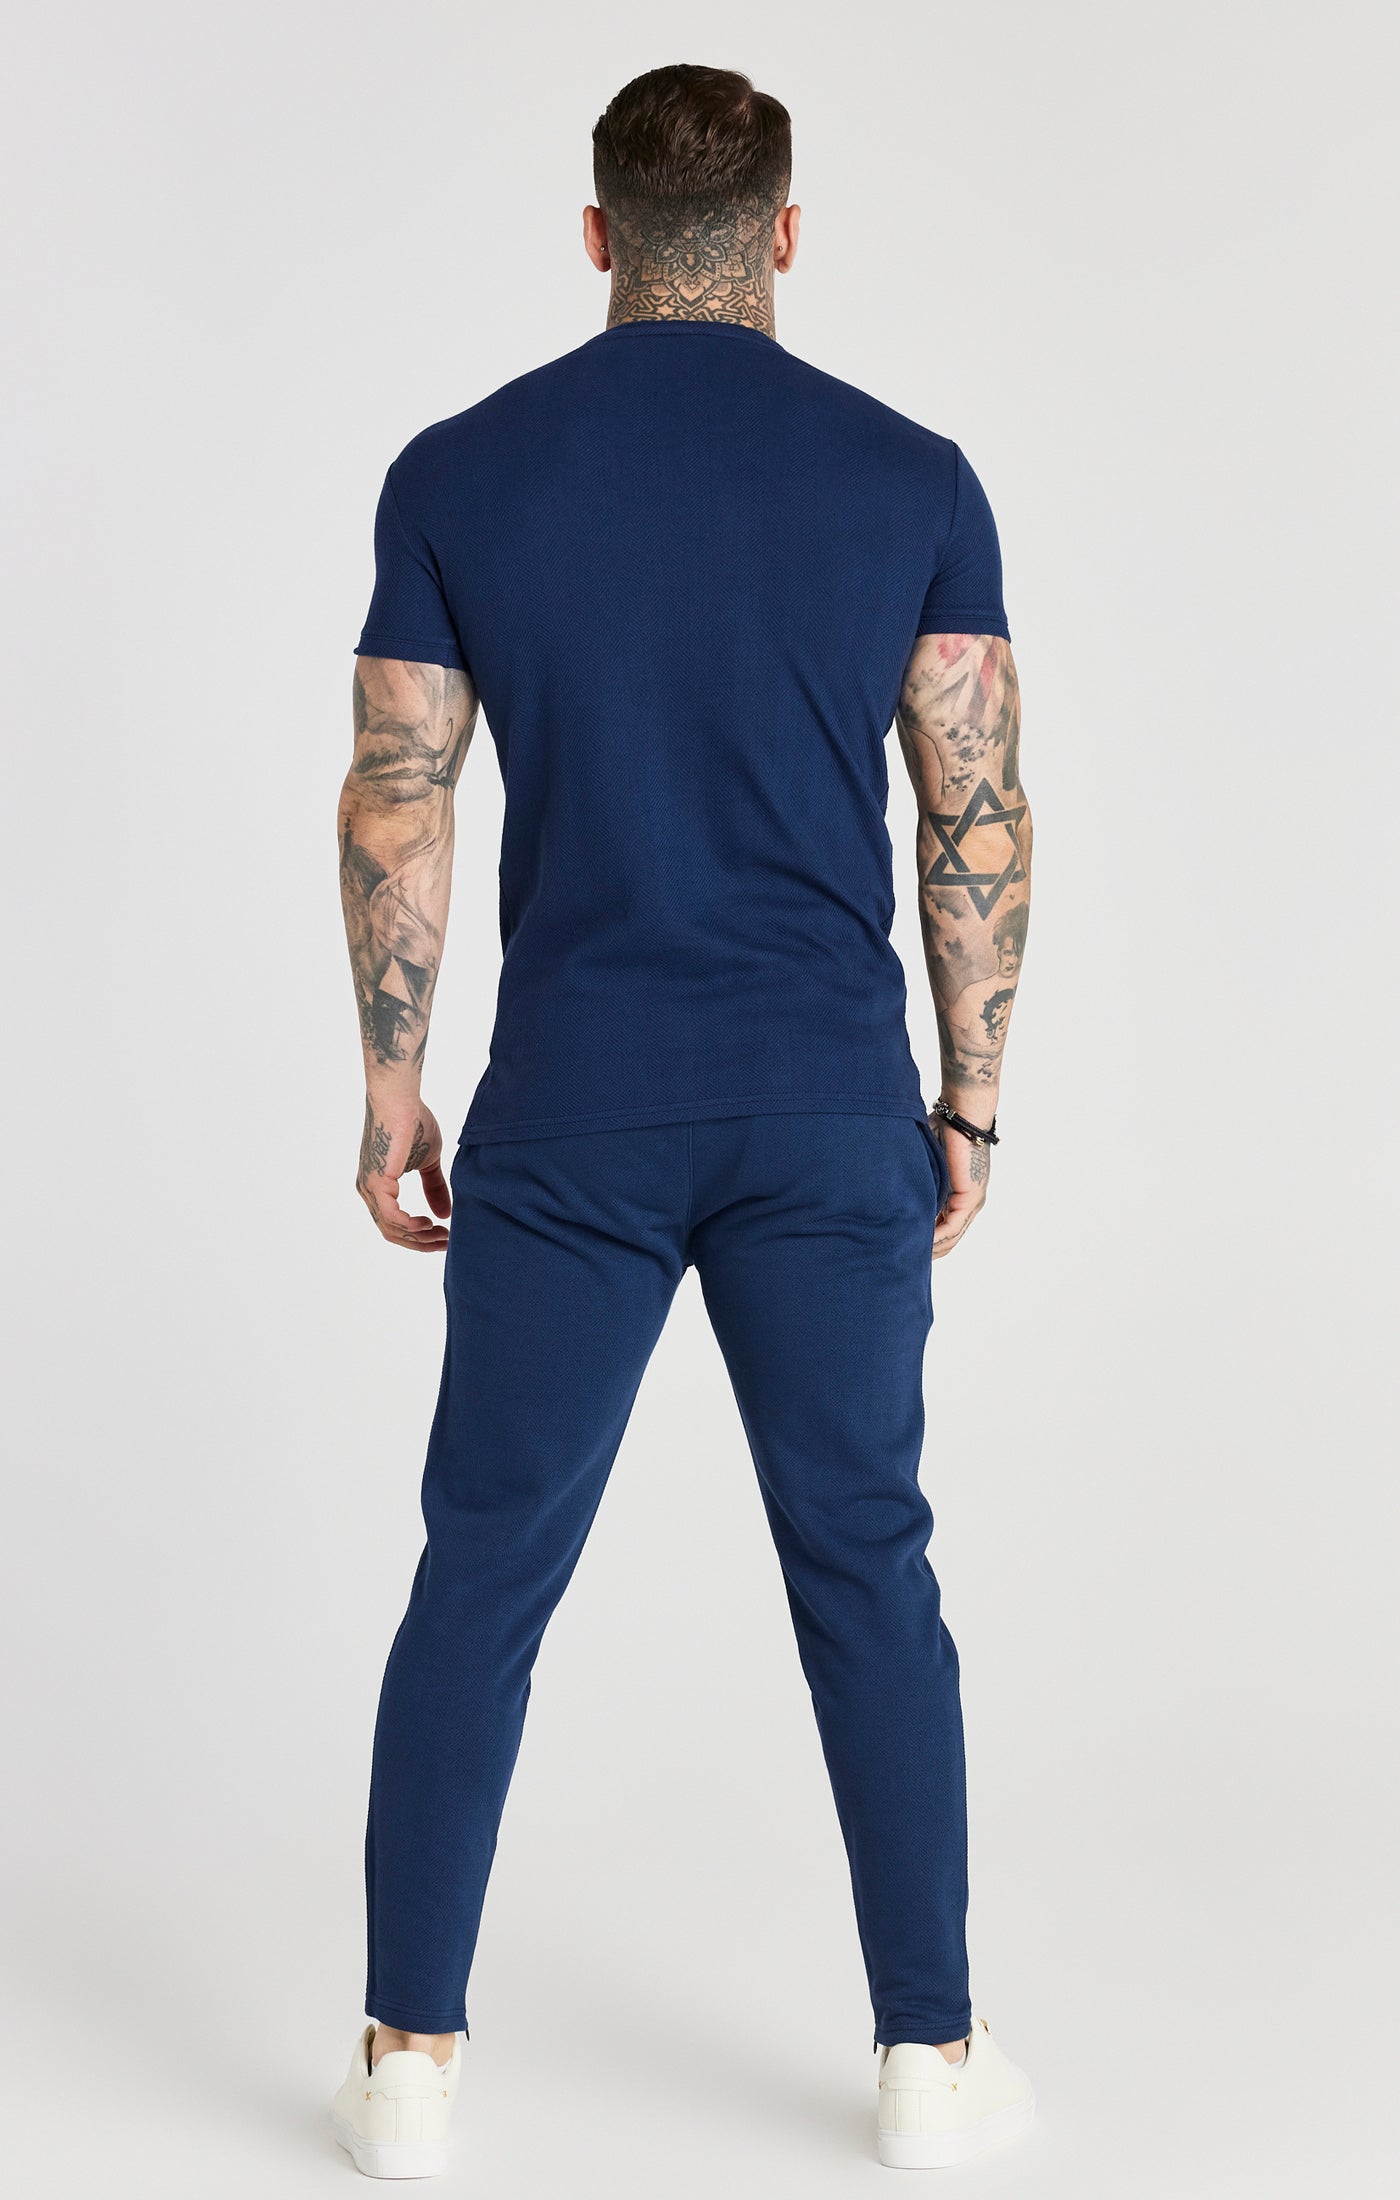 Load image into Gallery viewer, Navy Herringbone Muscle Fit T-Shirt (3)